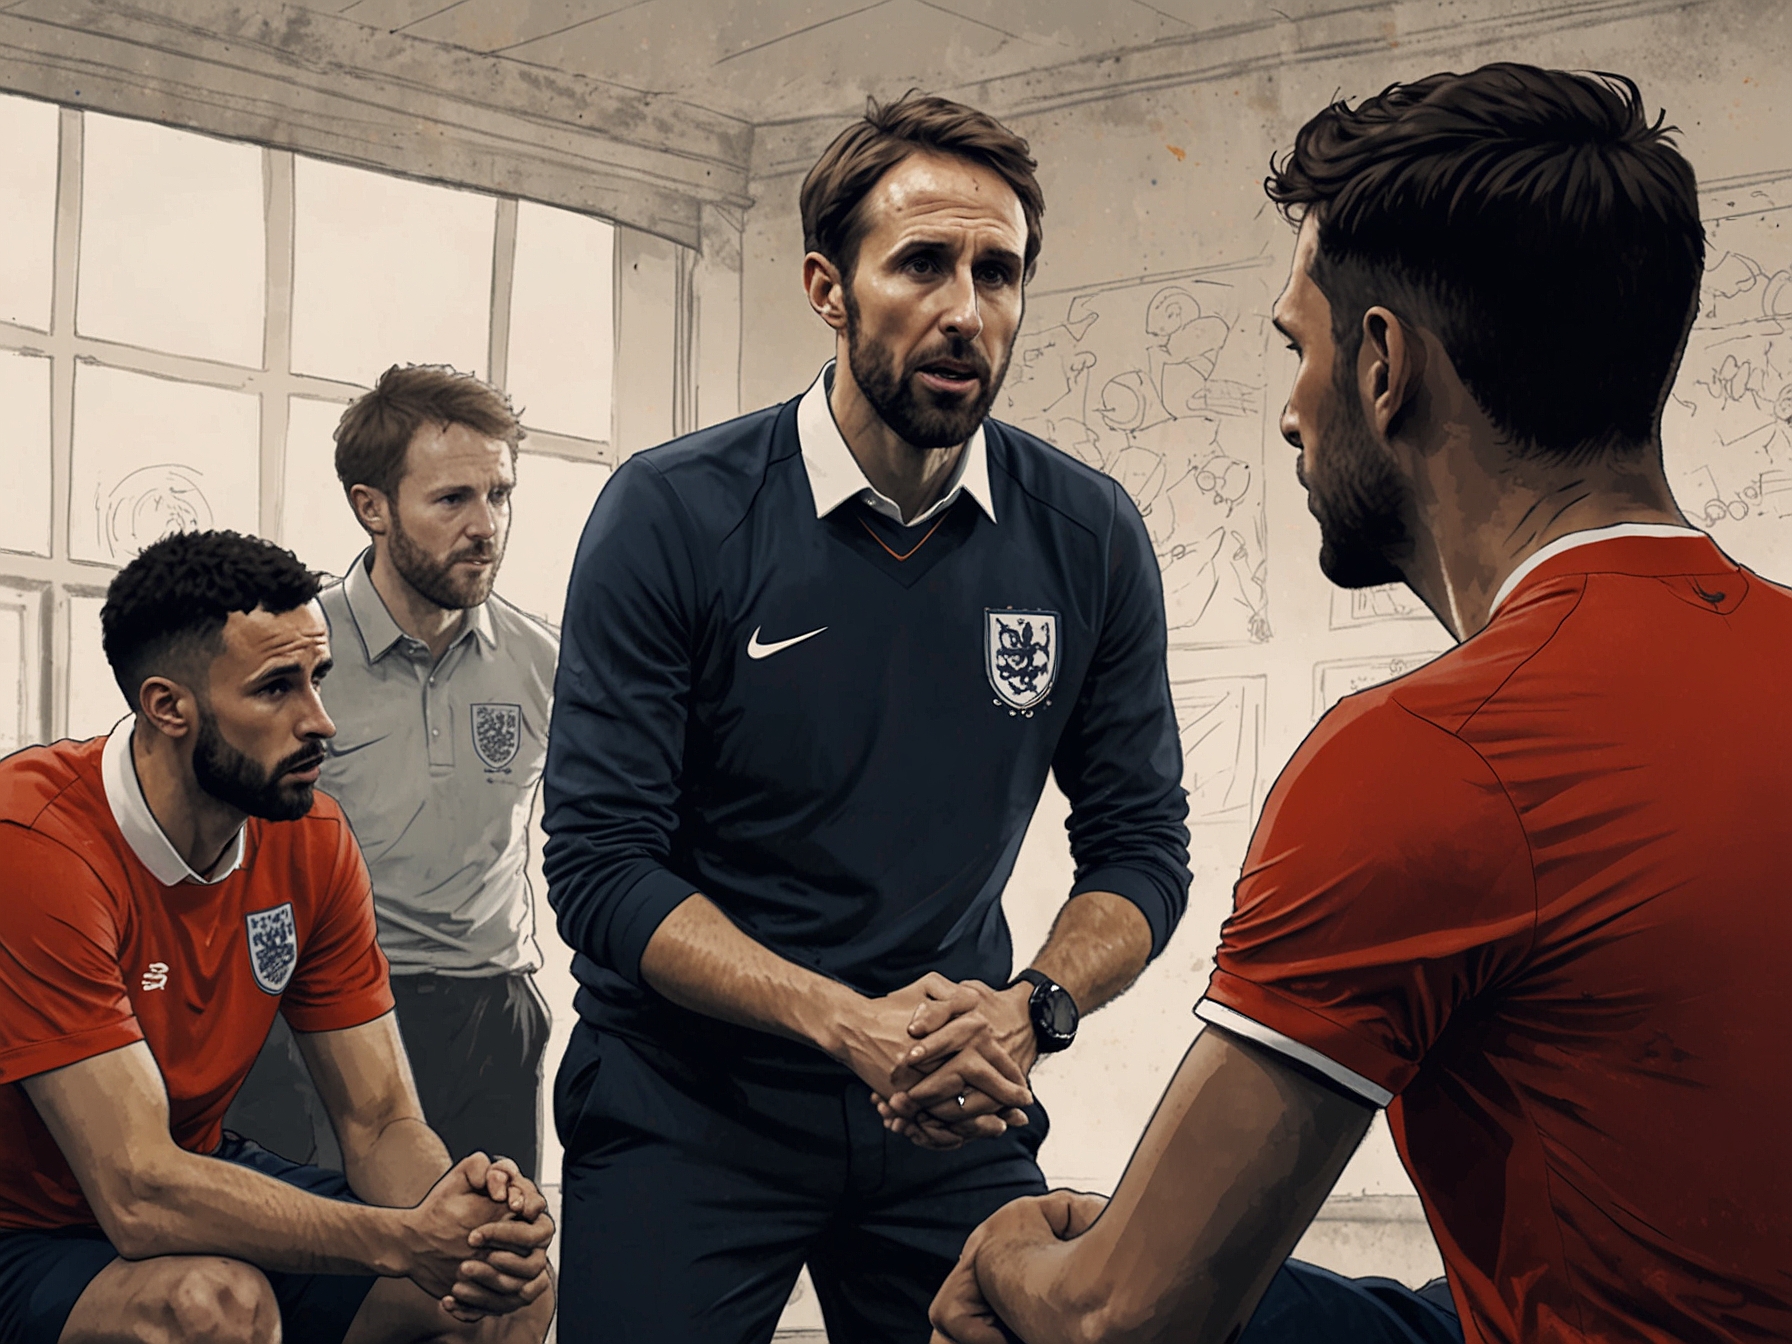 Illustration of Gareth Southgate discussing strategies with the team, highlighting the need for a high-pressing, aggressive approach to improve their offensive play.